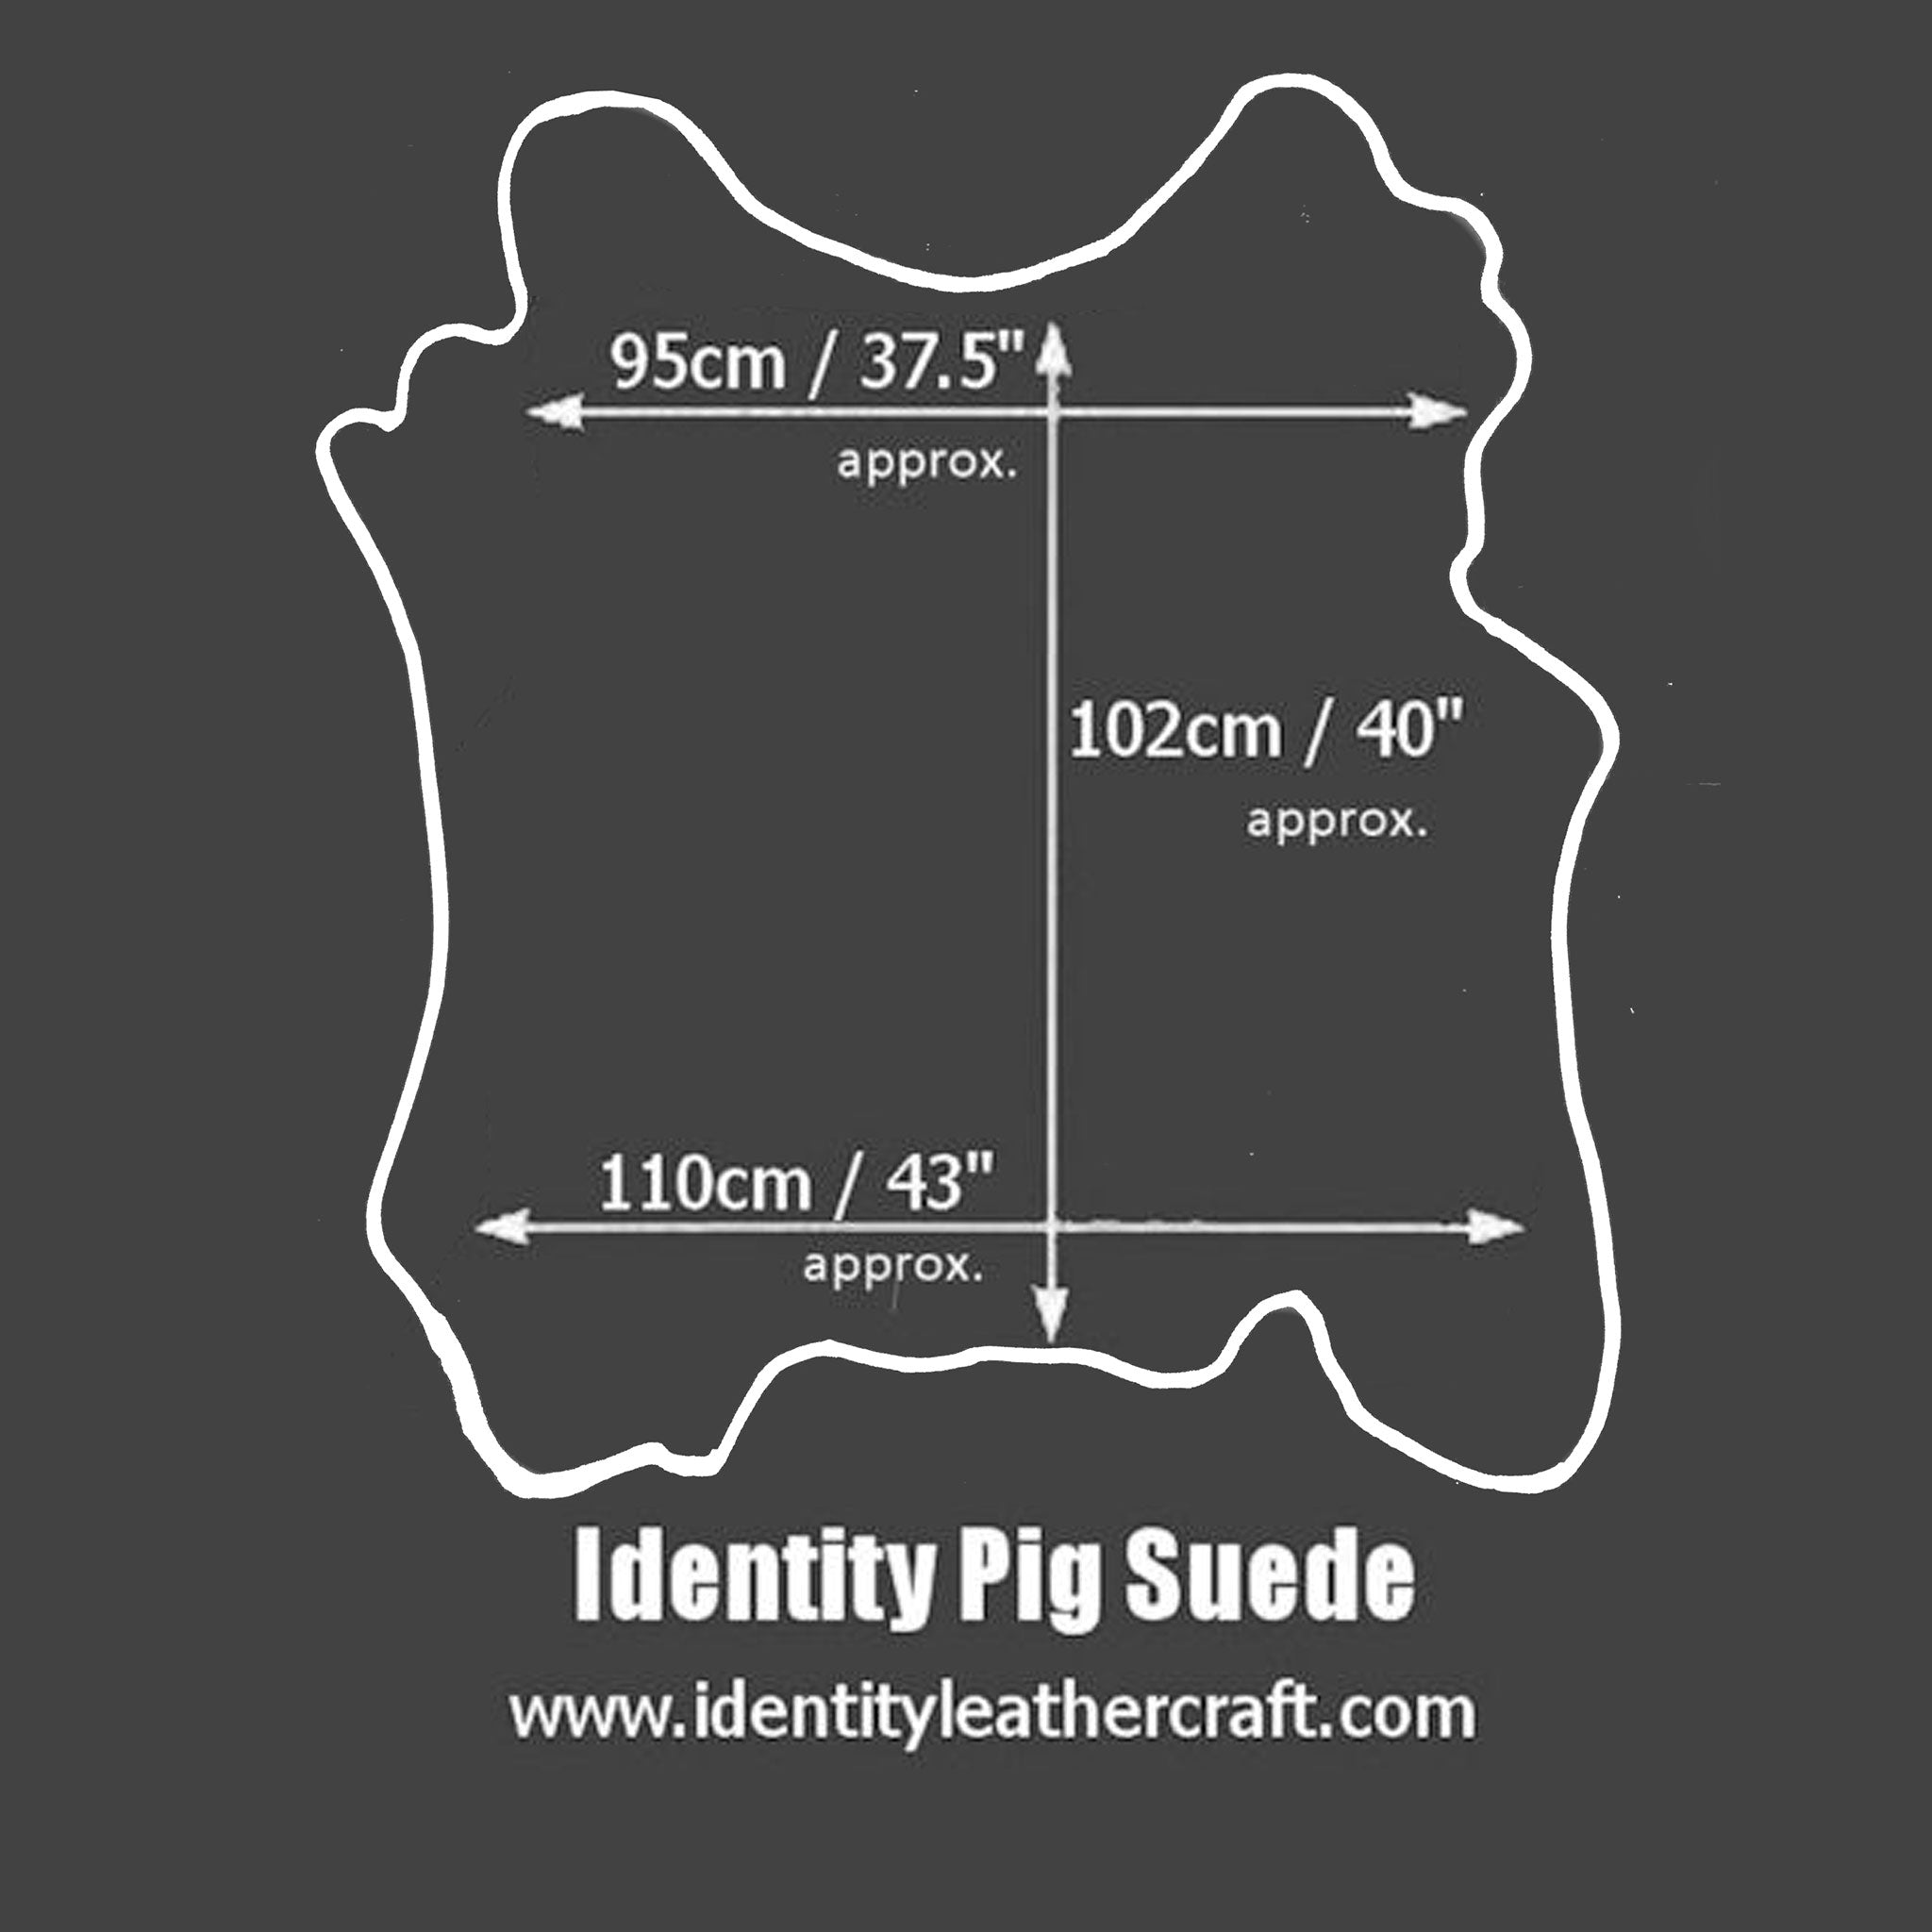 Pig Suede Size Guide